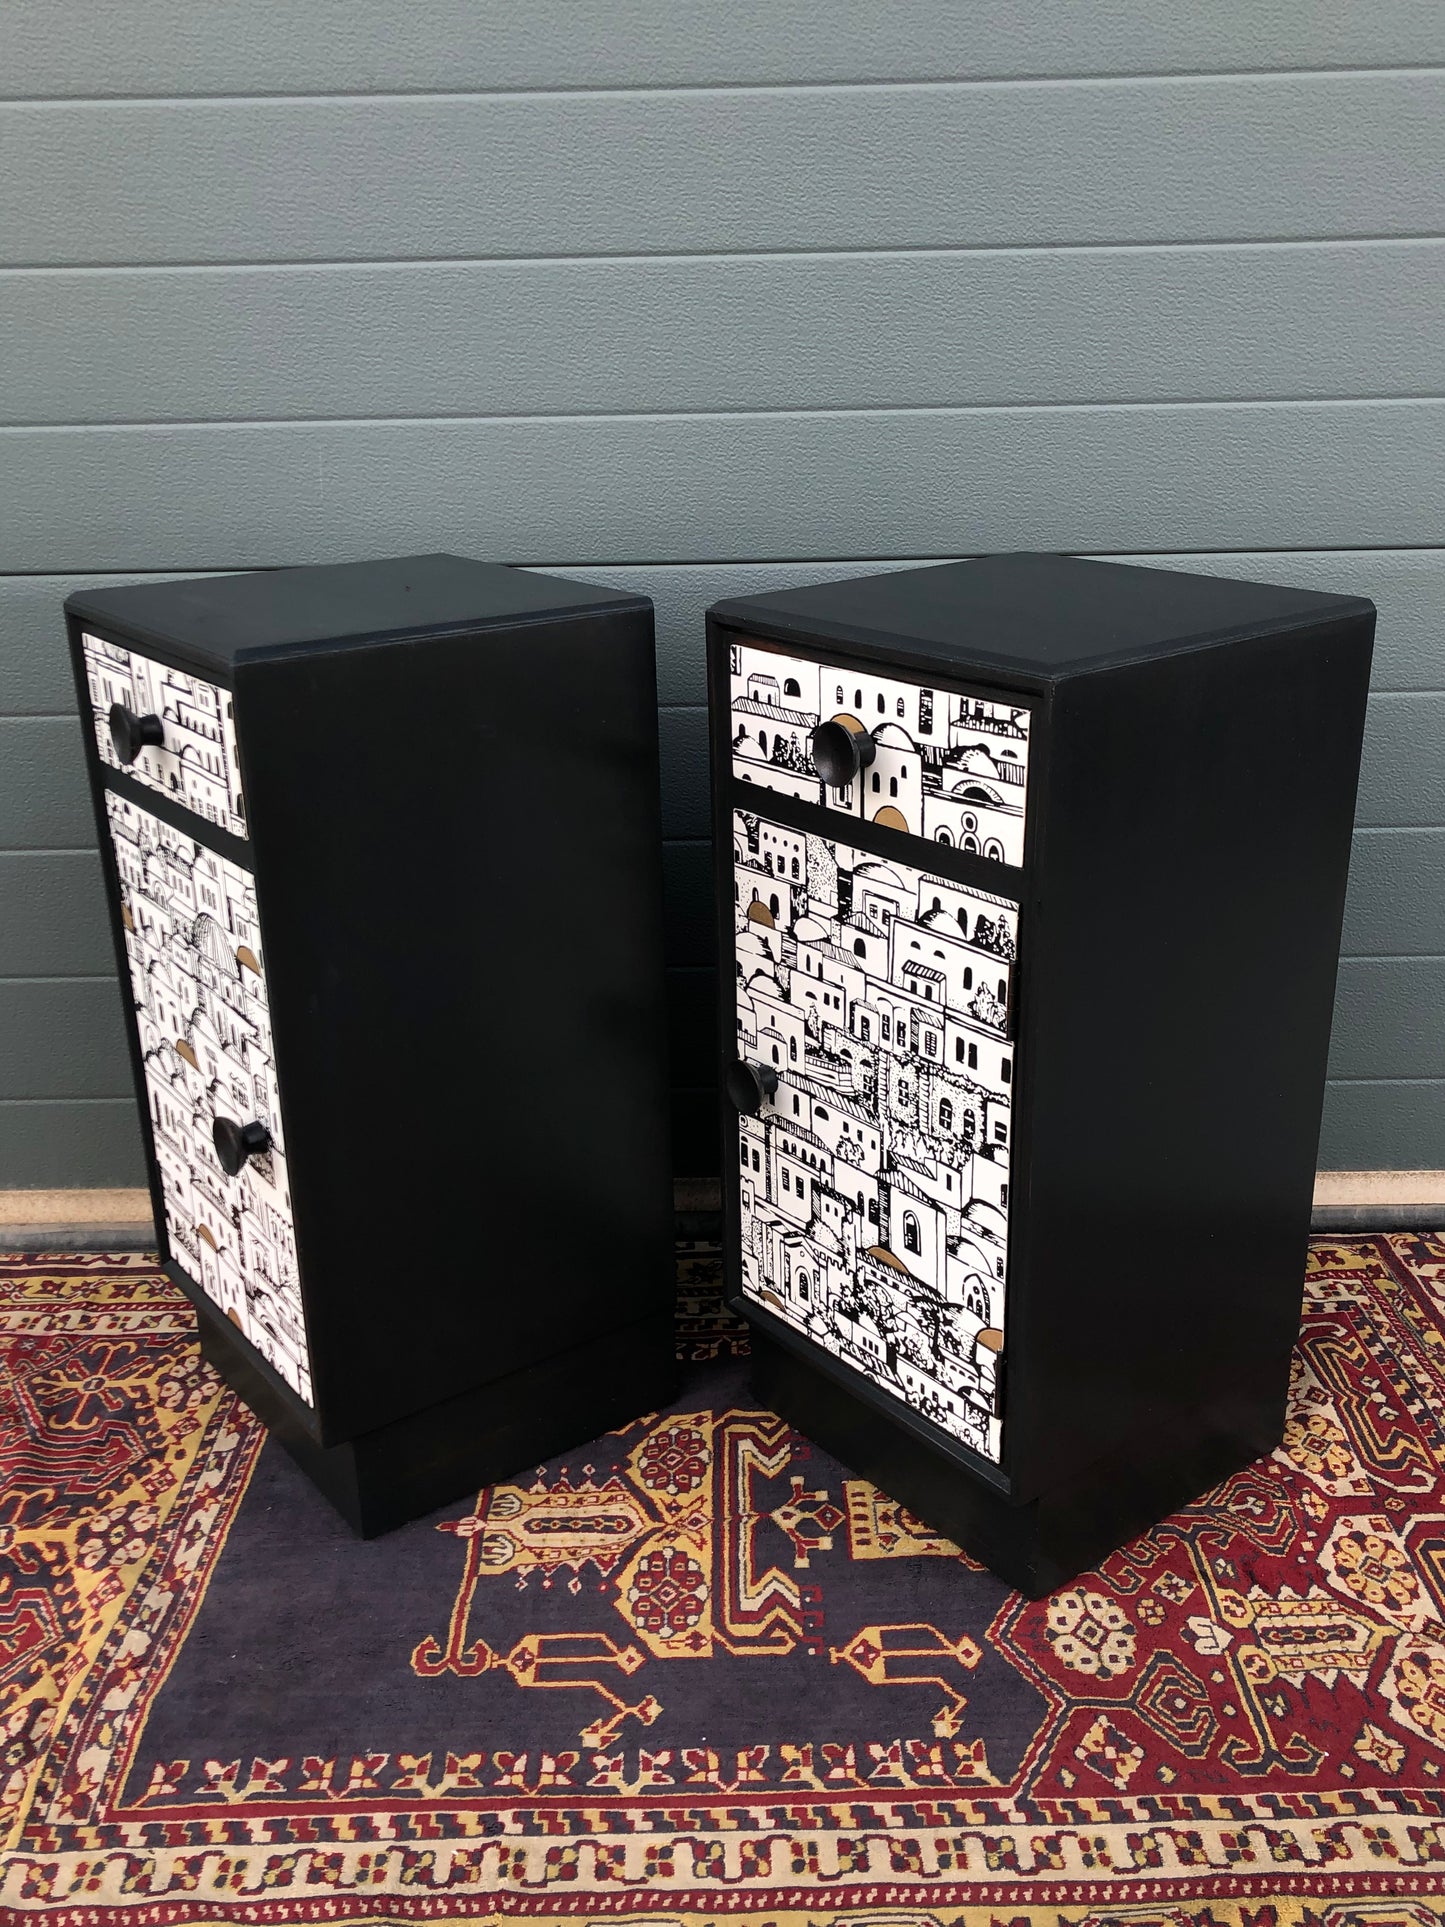 Pair Of Refinished Art Deco Style Bedside Cabinets / Bedside Tables ( SOLD )